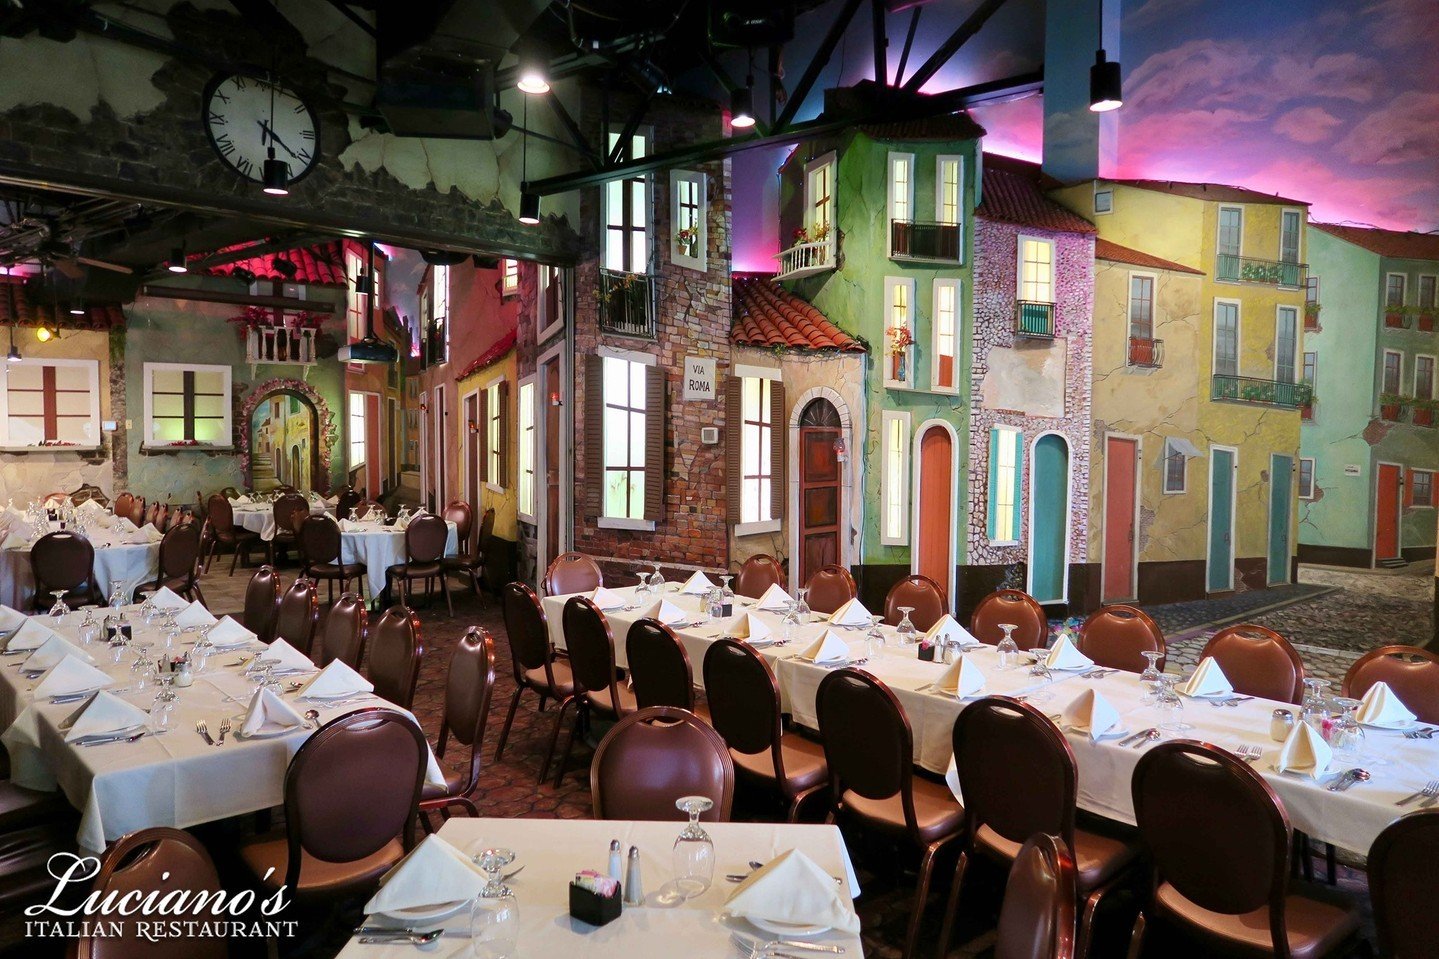 Luciano's is the perfect spot for funerals, private daytime events, and business luncheons. Let us help create the ideal ambiance for your important events. Book now at https://www.lucianositaliancuisine.com/requestabooking